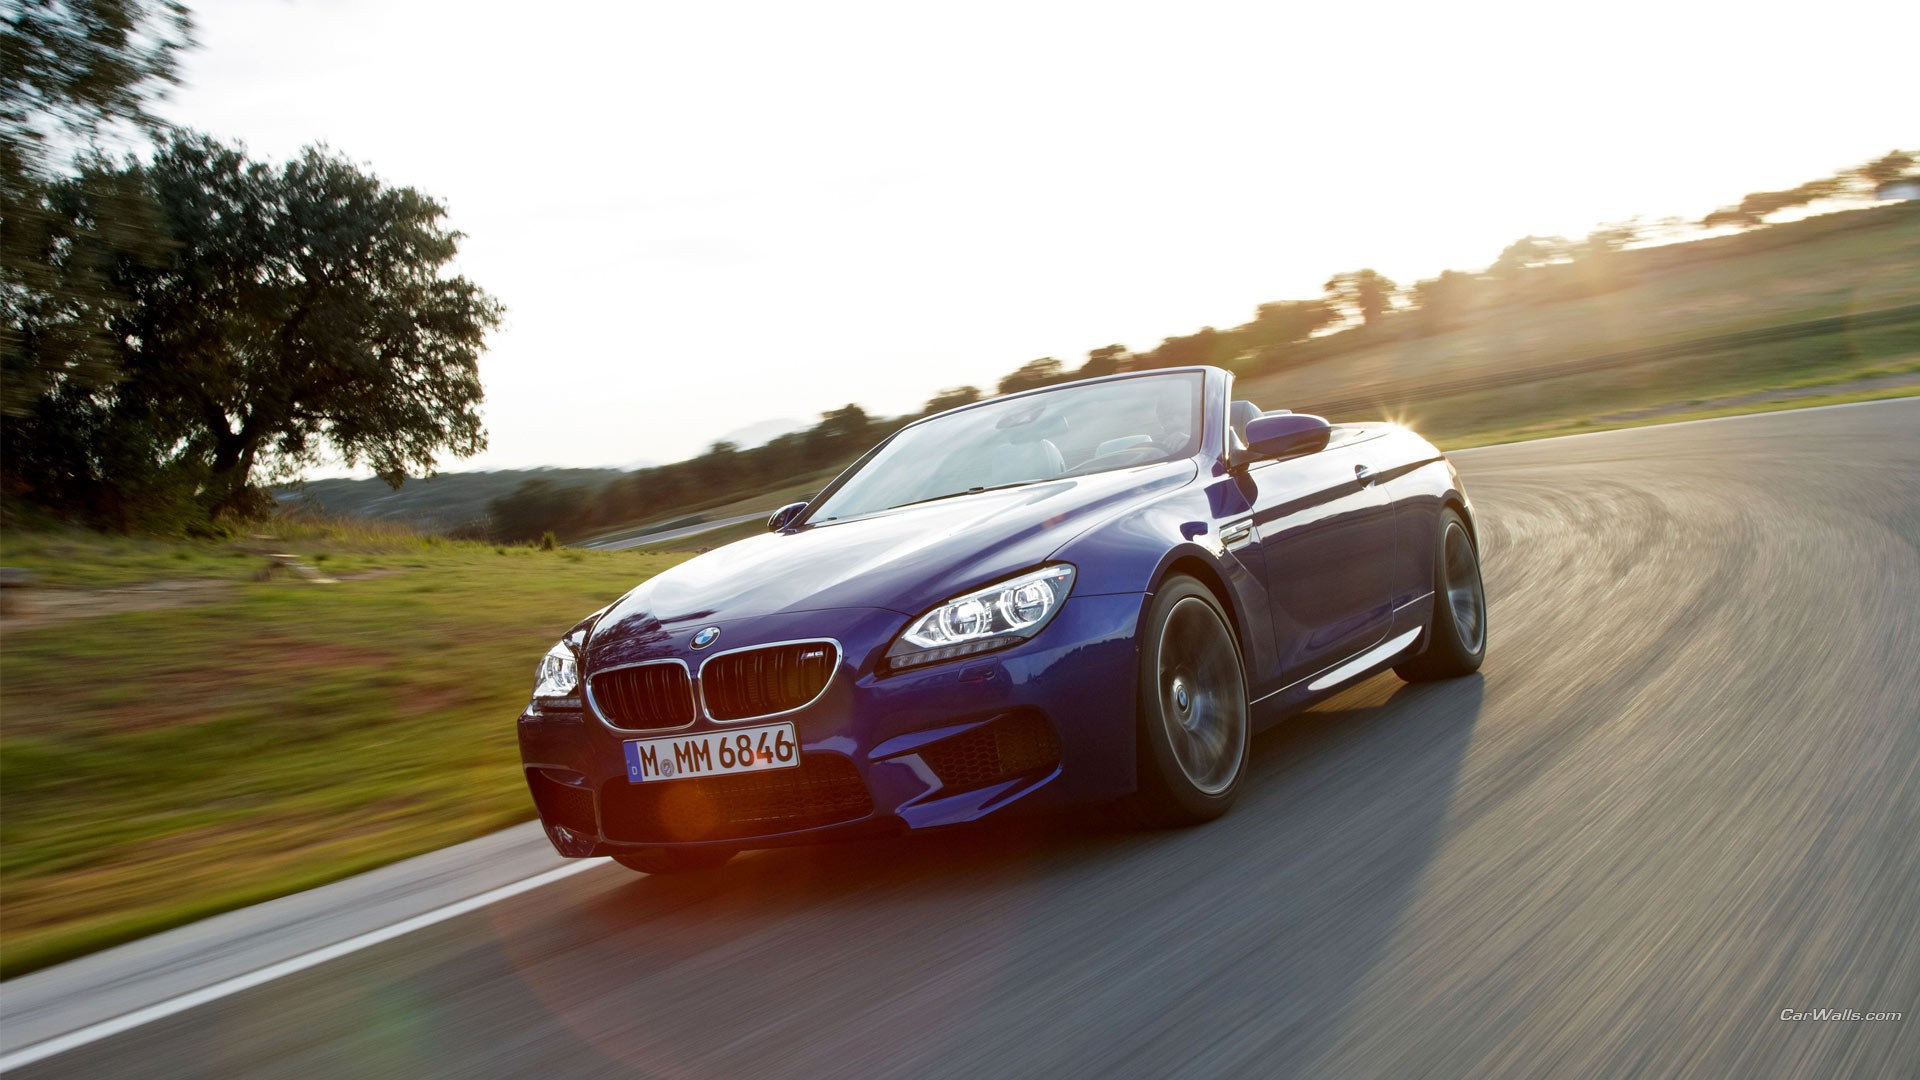 Bmw M6 Convertible Wallpapers